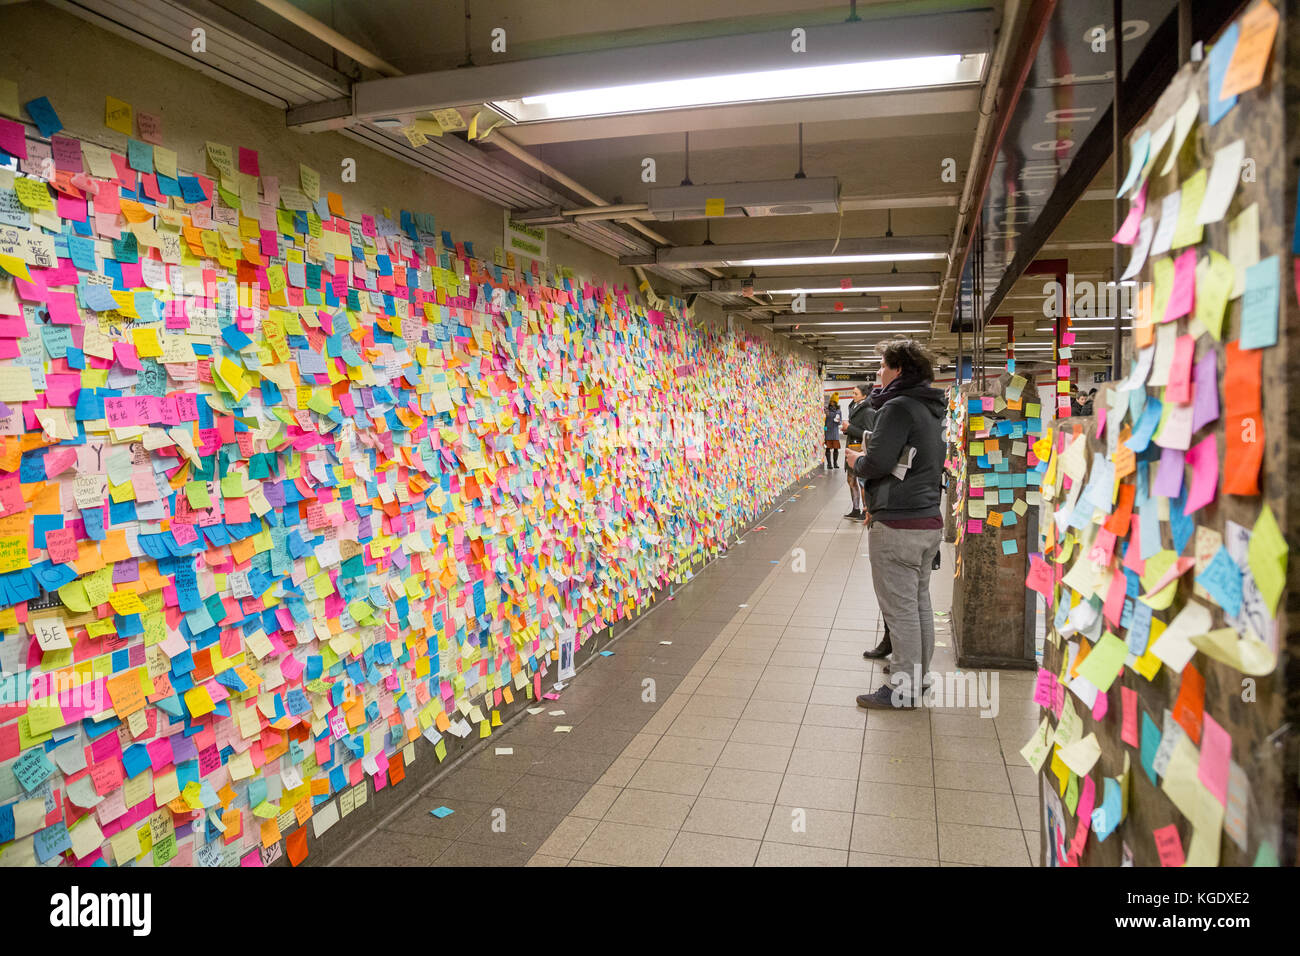 Sticky post-it notes in NYC subway station Stock Photo